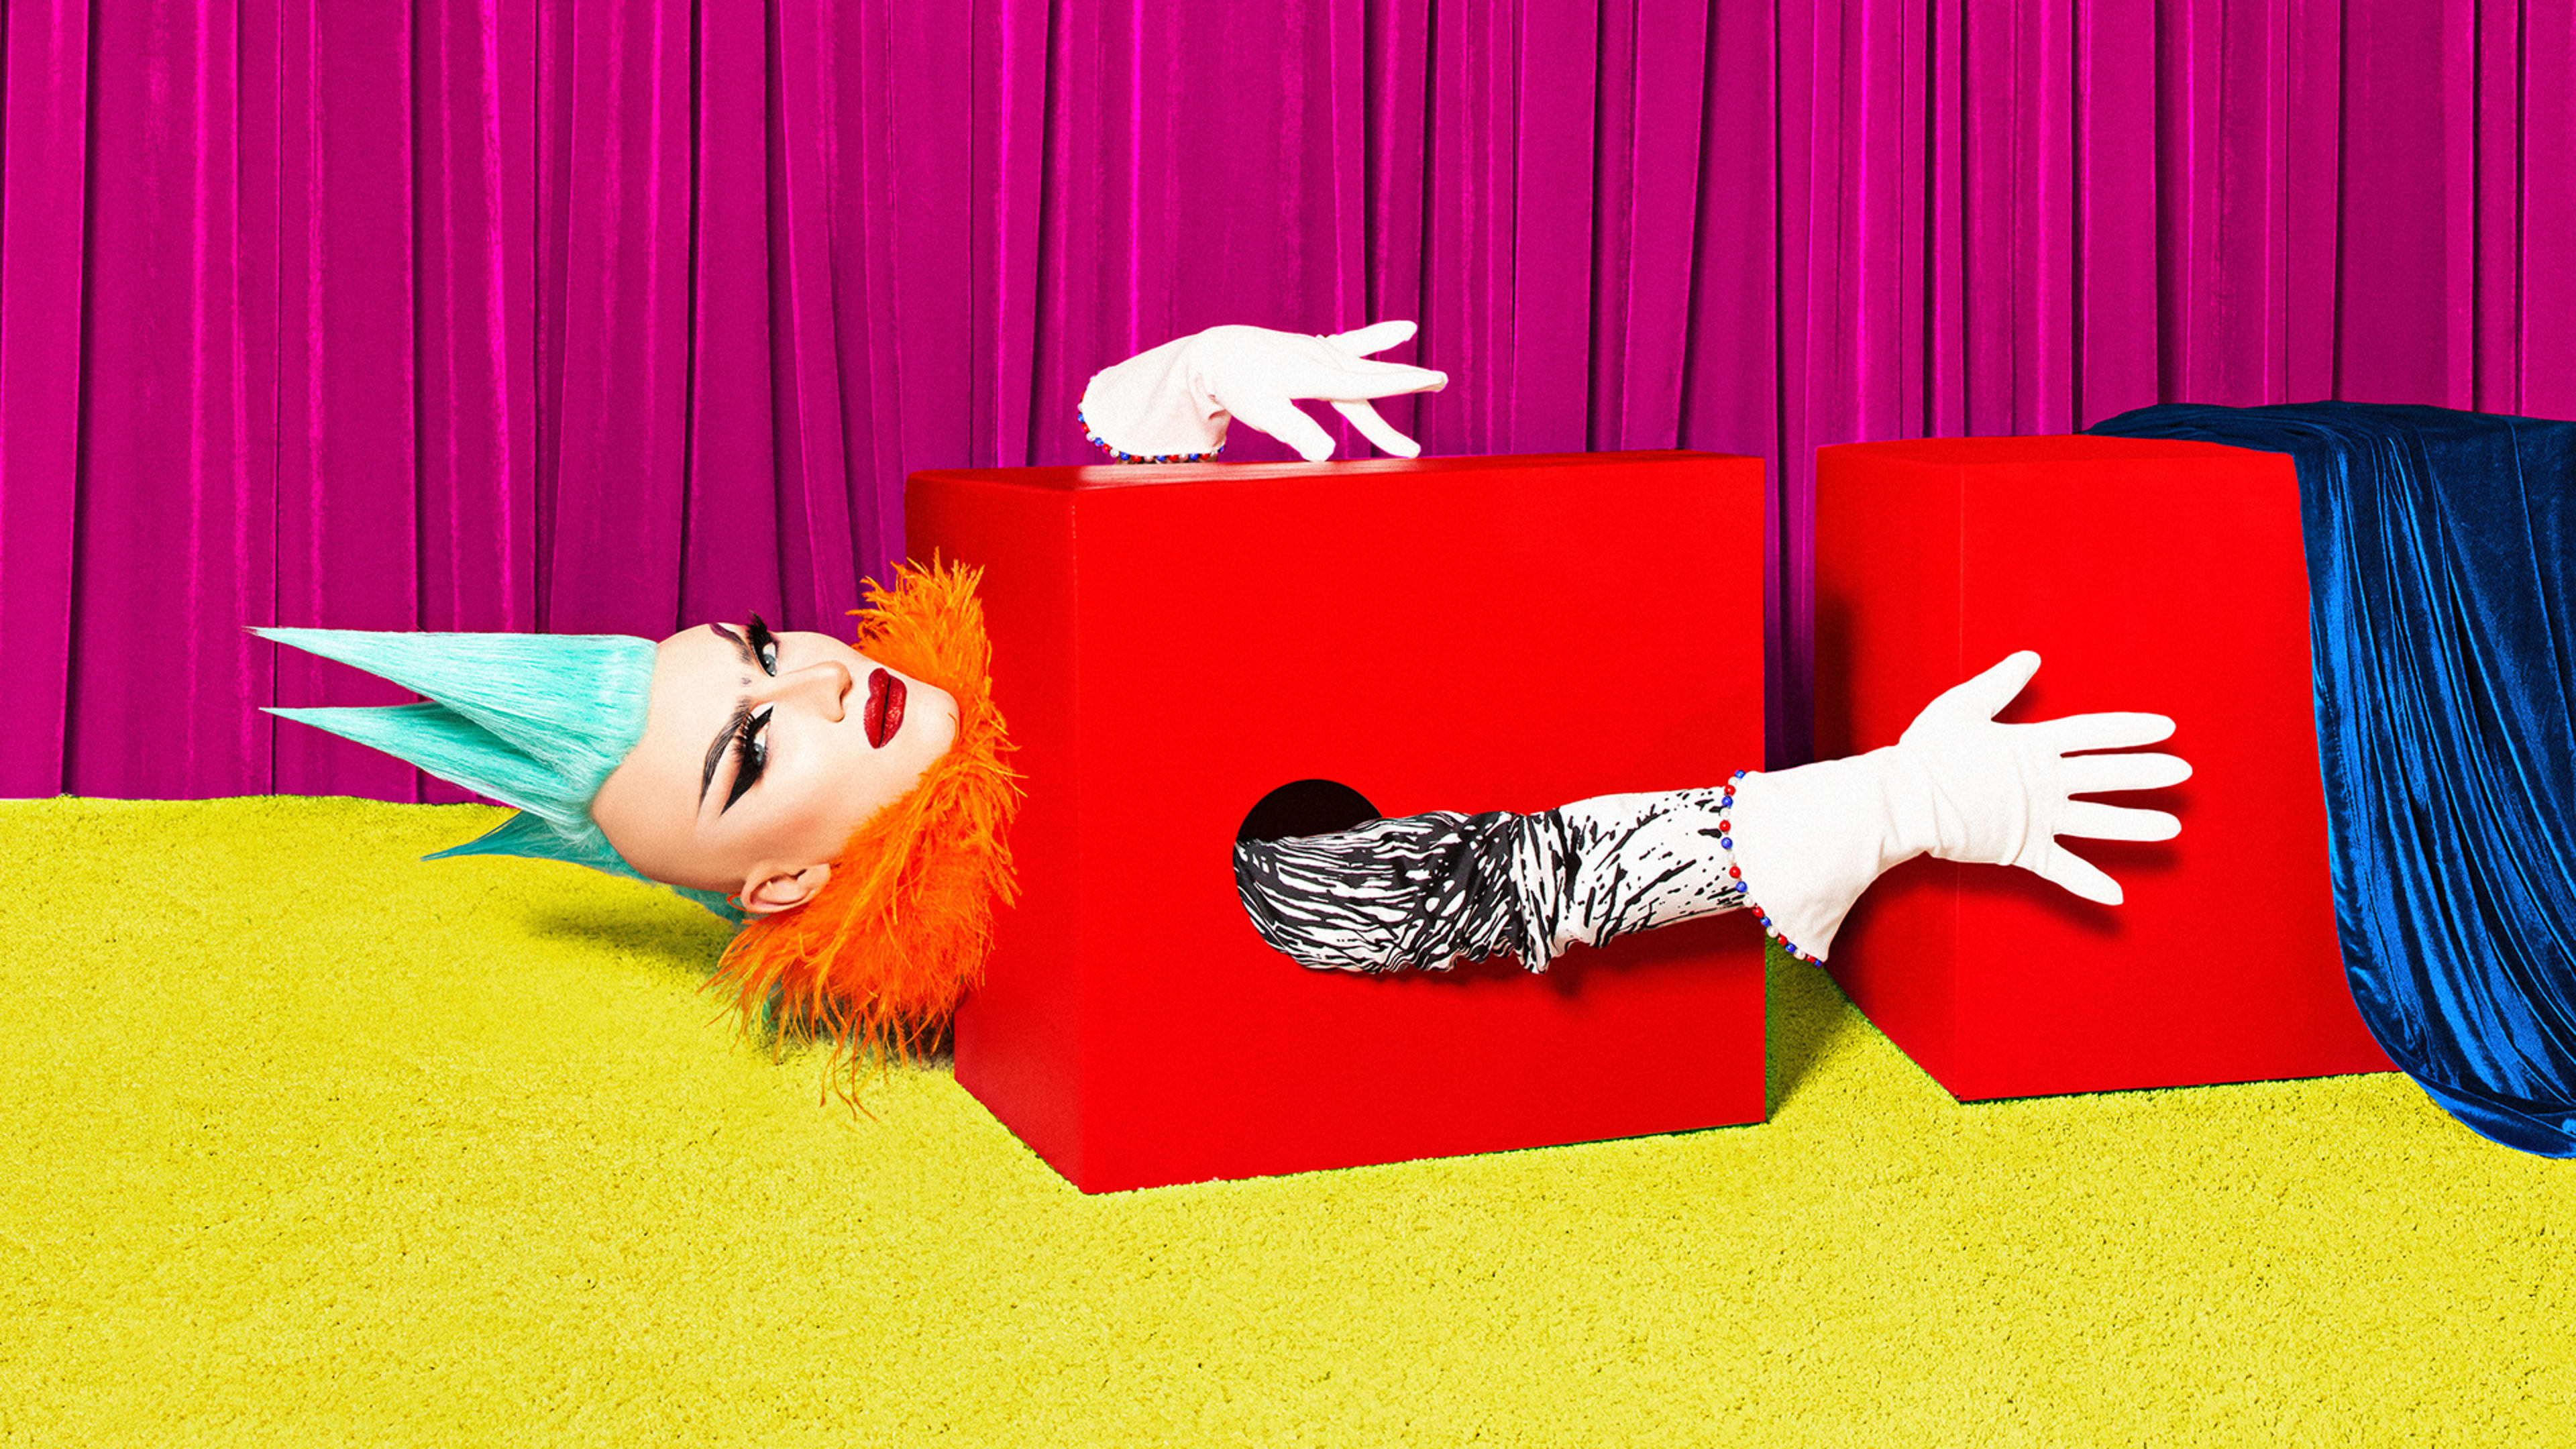 How the fantasy of drag helps Sasha Velour deal with reality